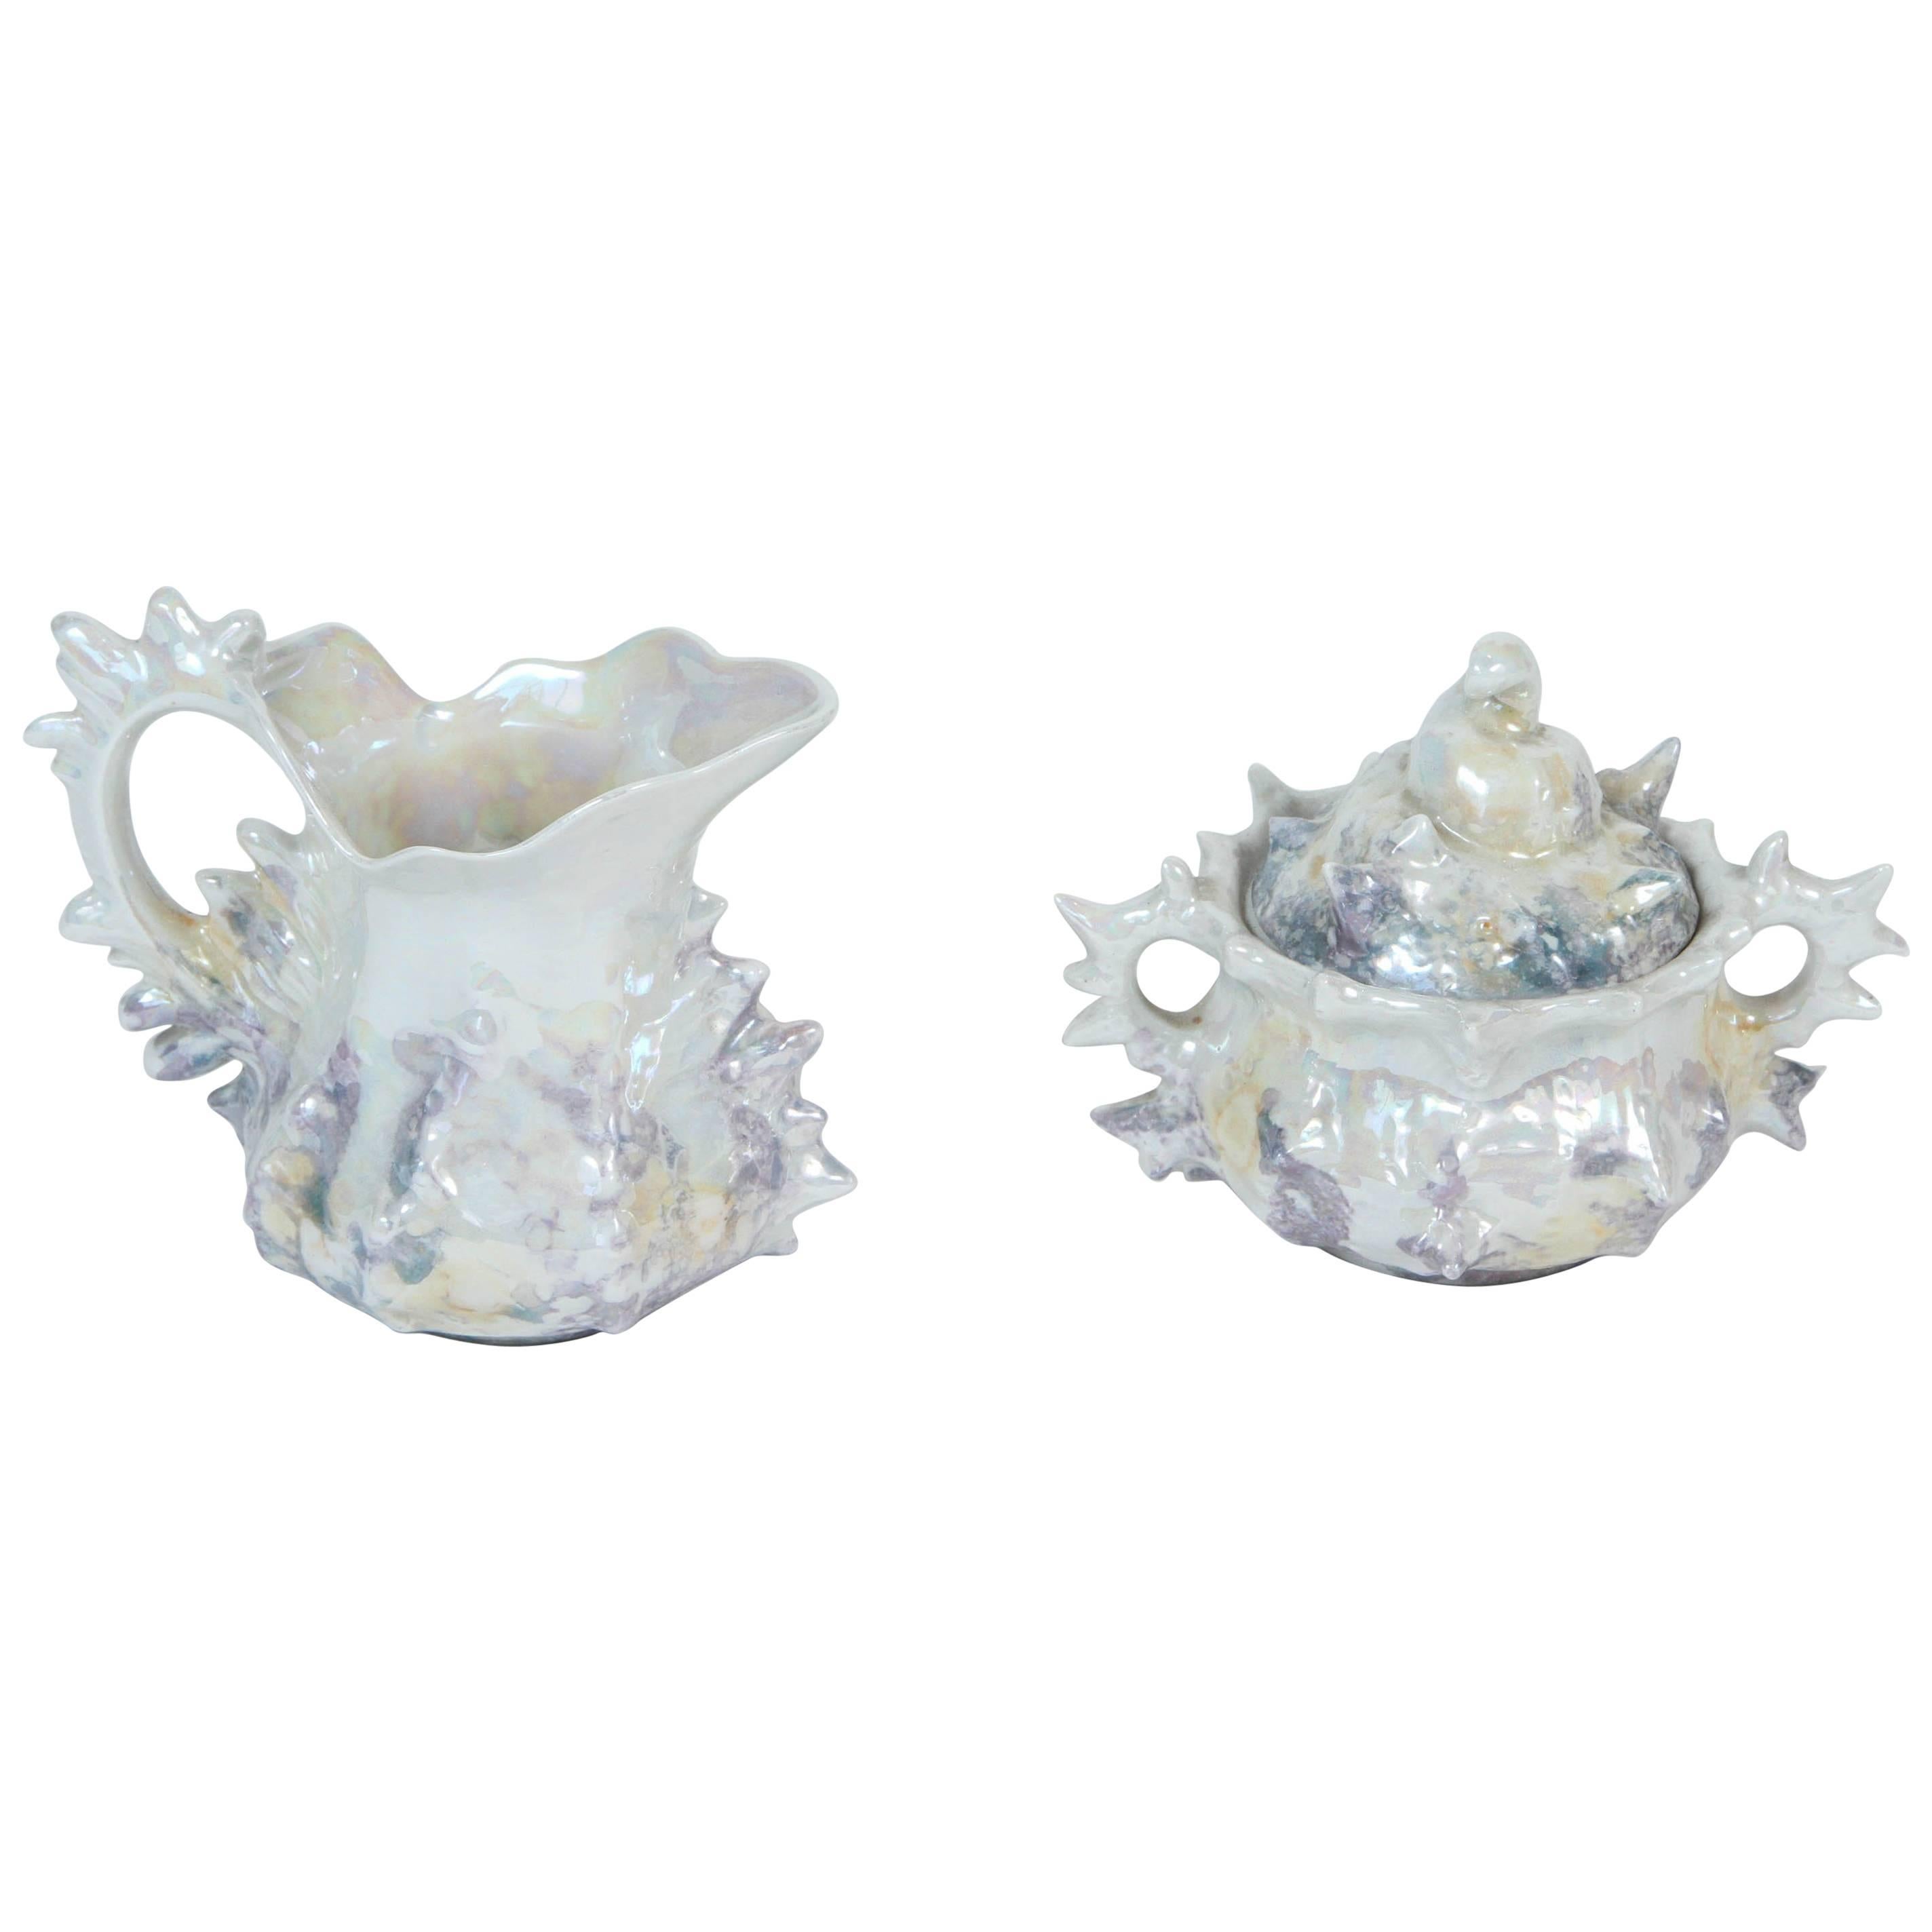 Vintage Porcelain Lusterware Cream and Sugar Set from Germany